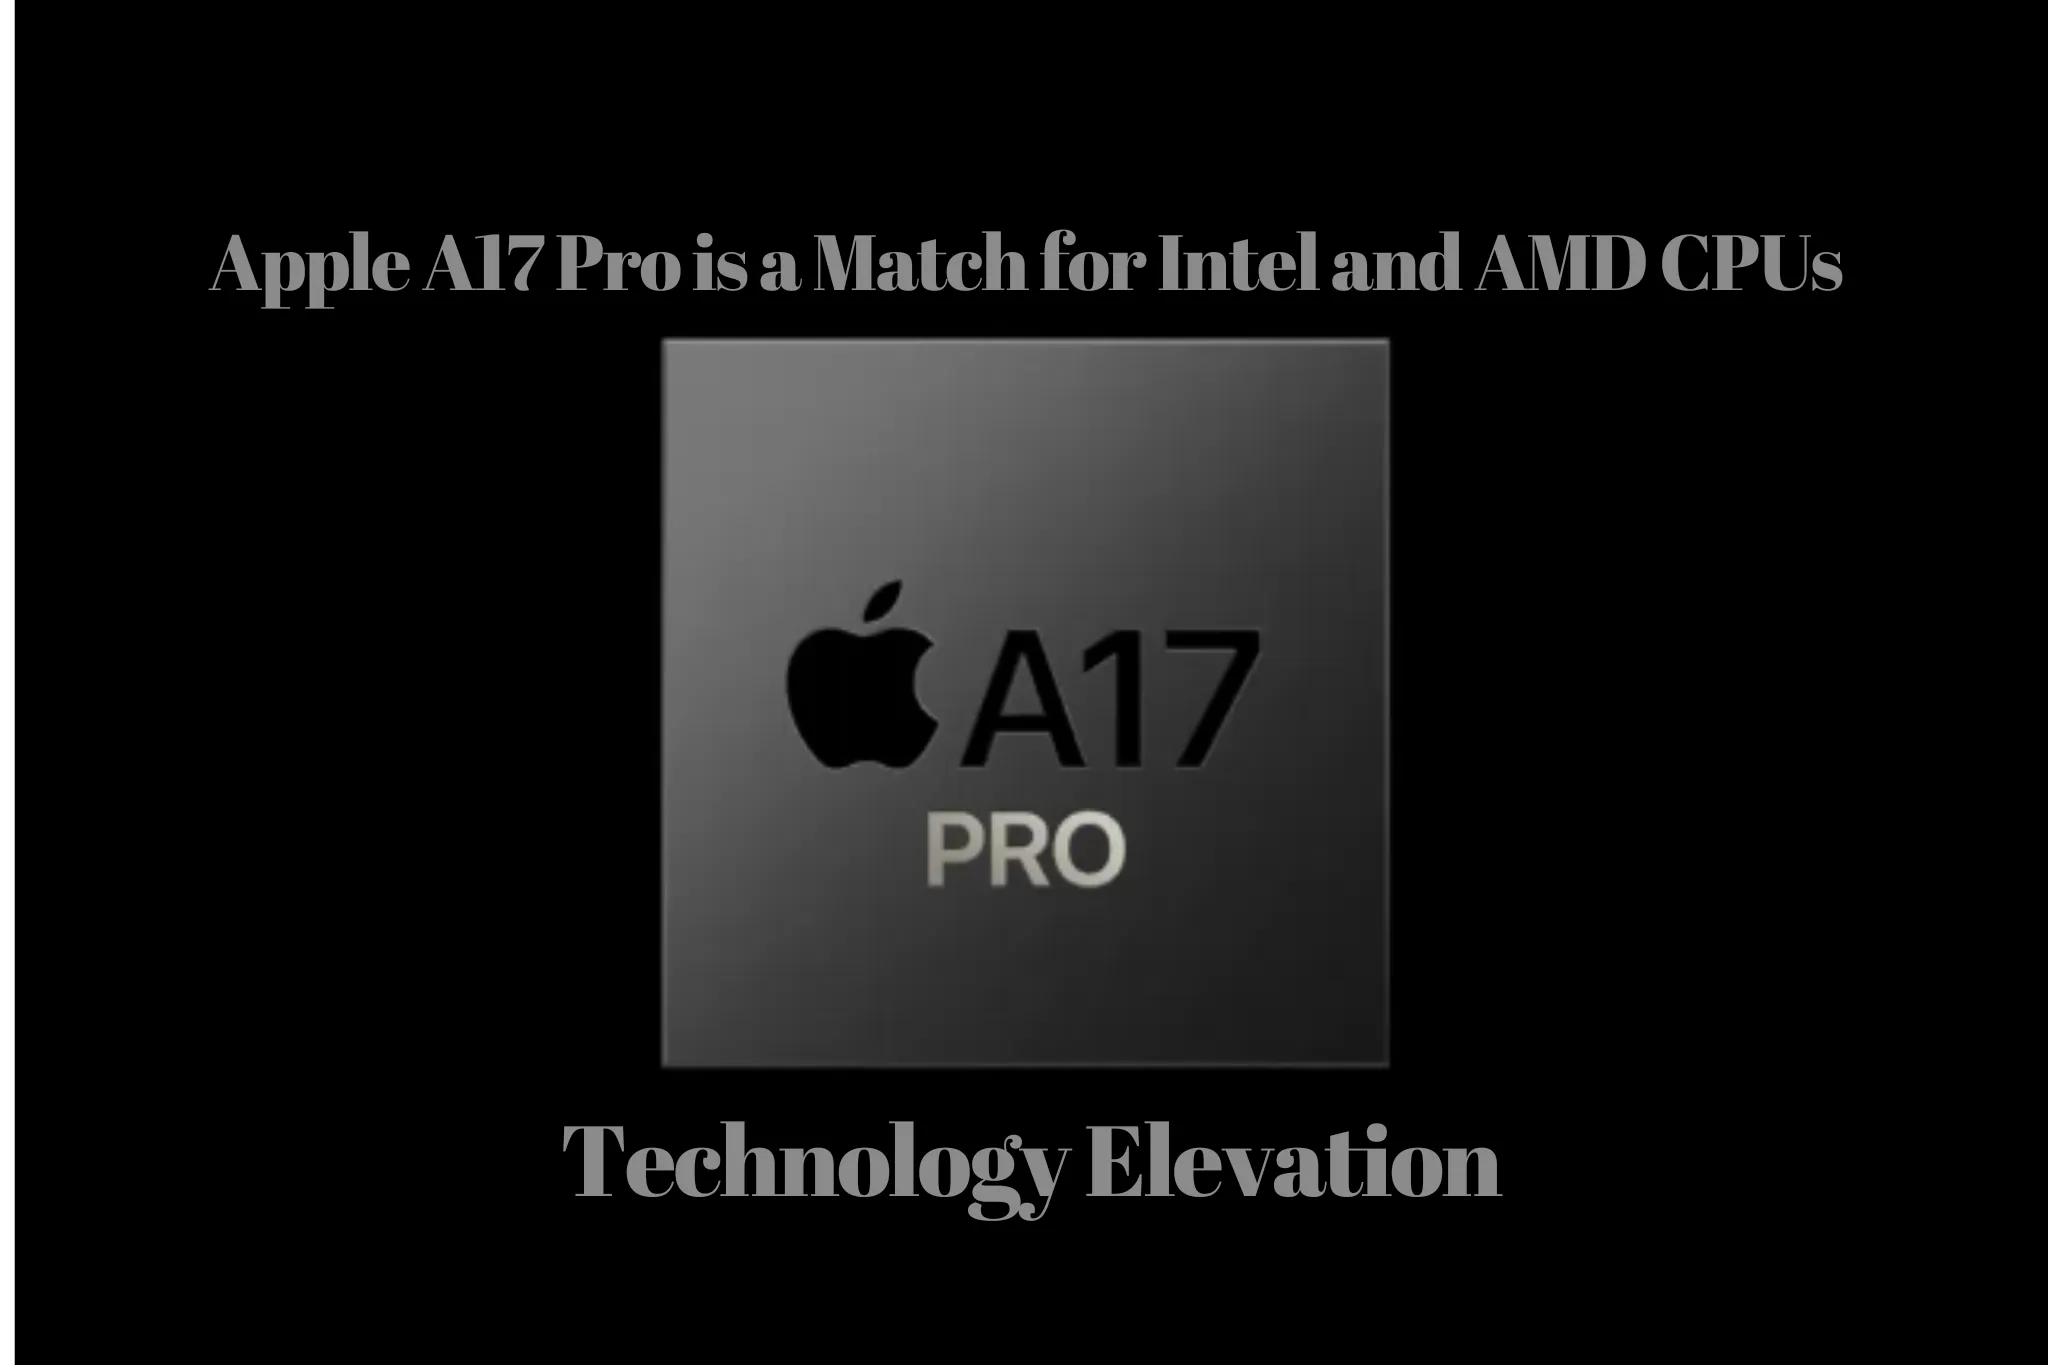 Apple A17 Pro is a Match for Intel and AMD CPUs